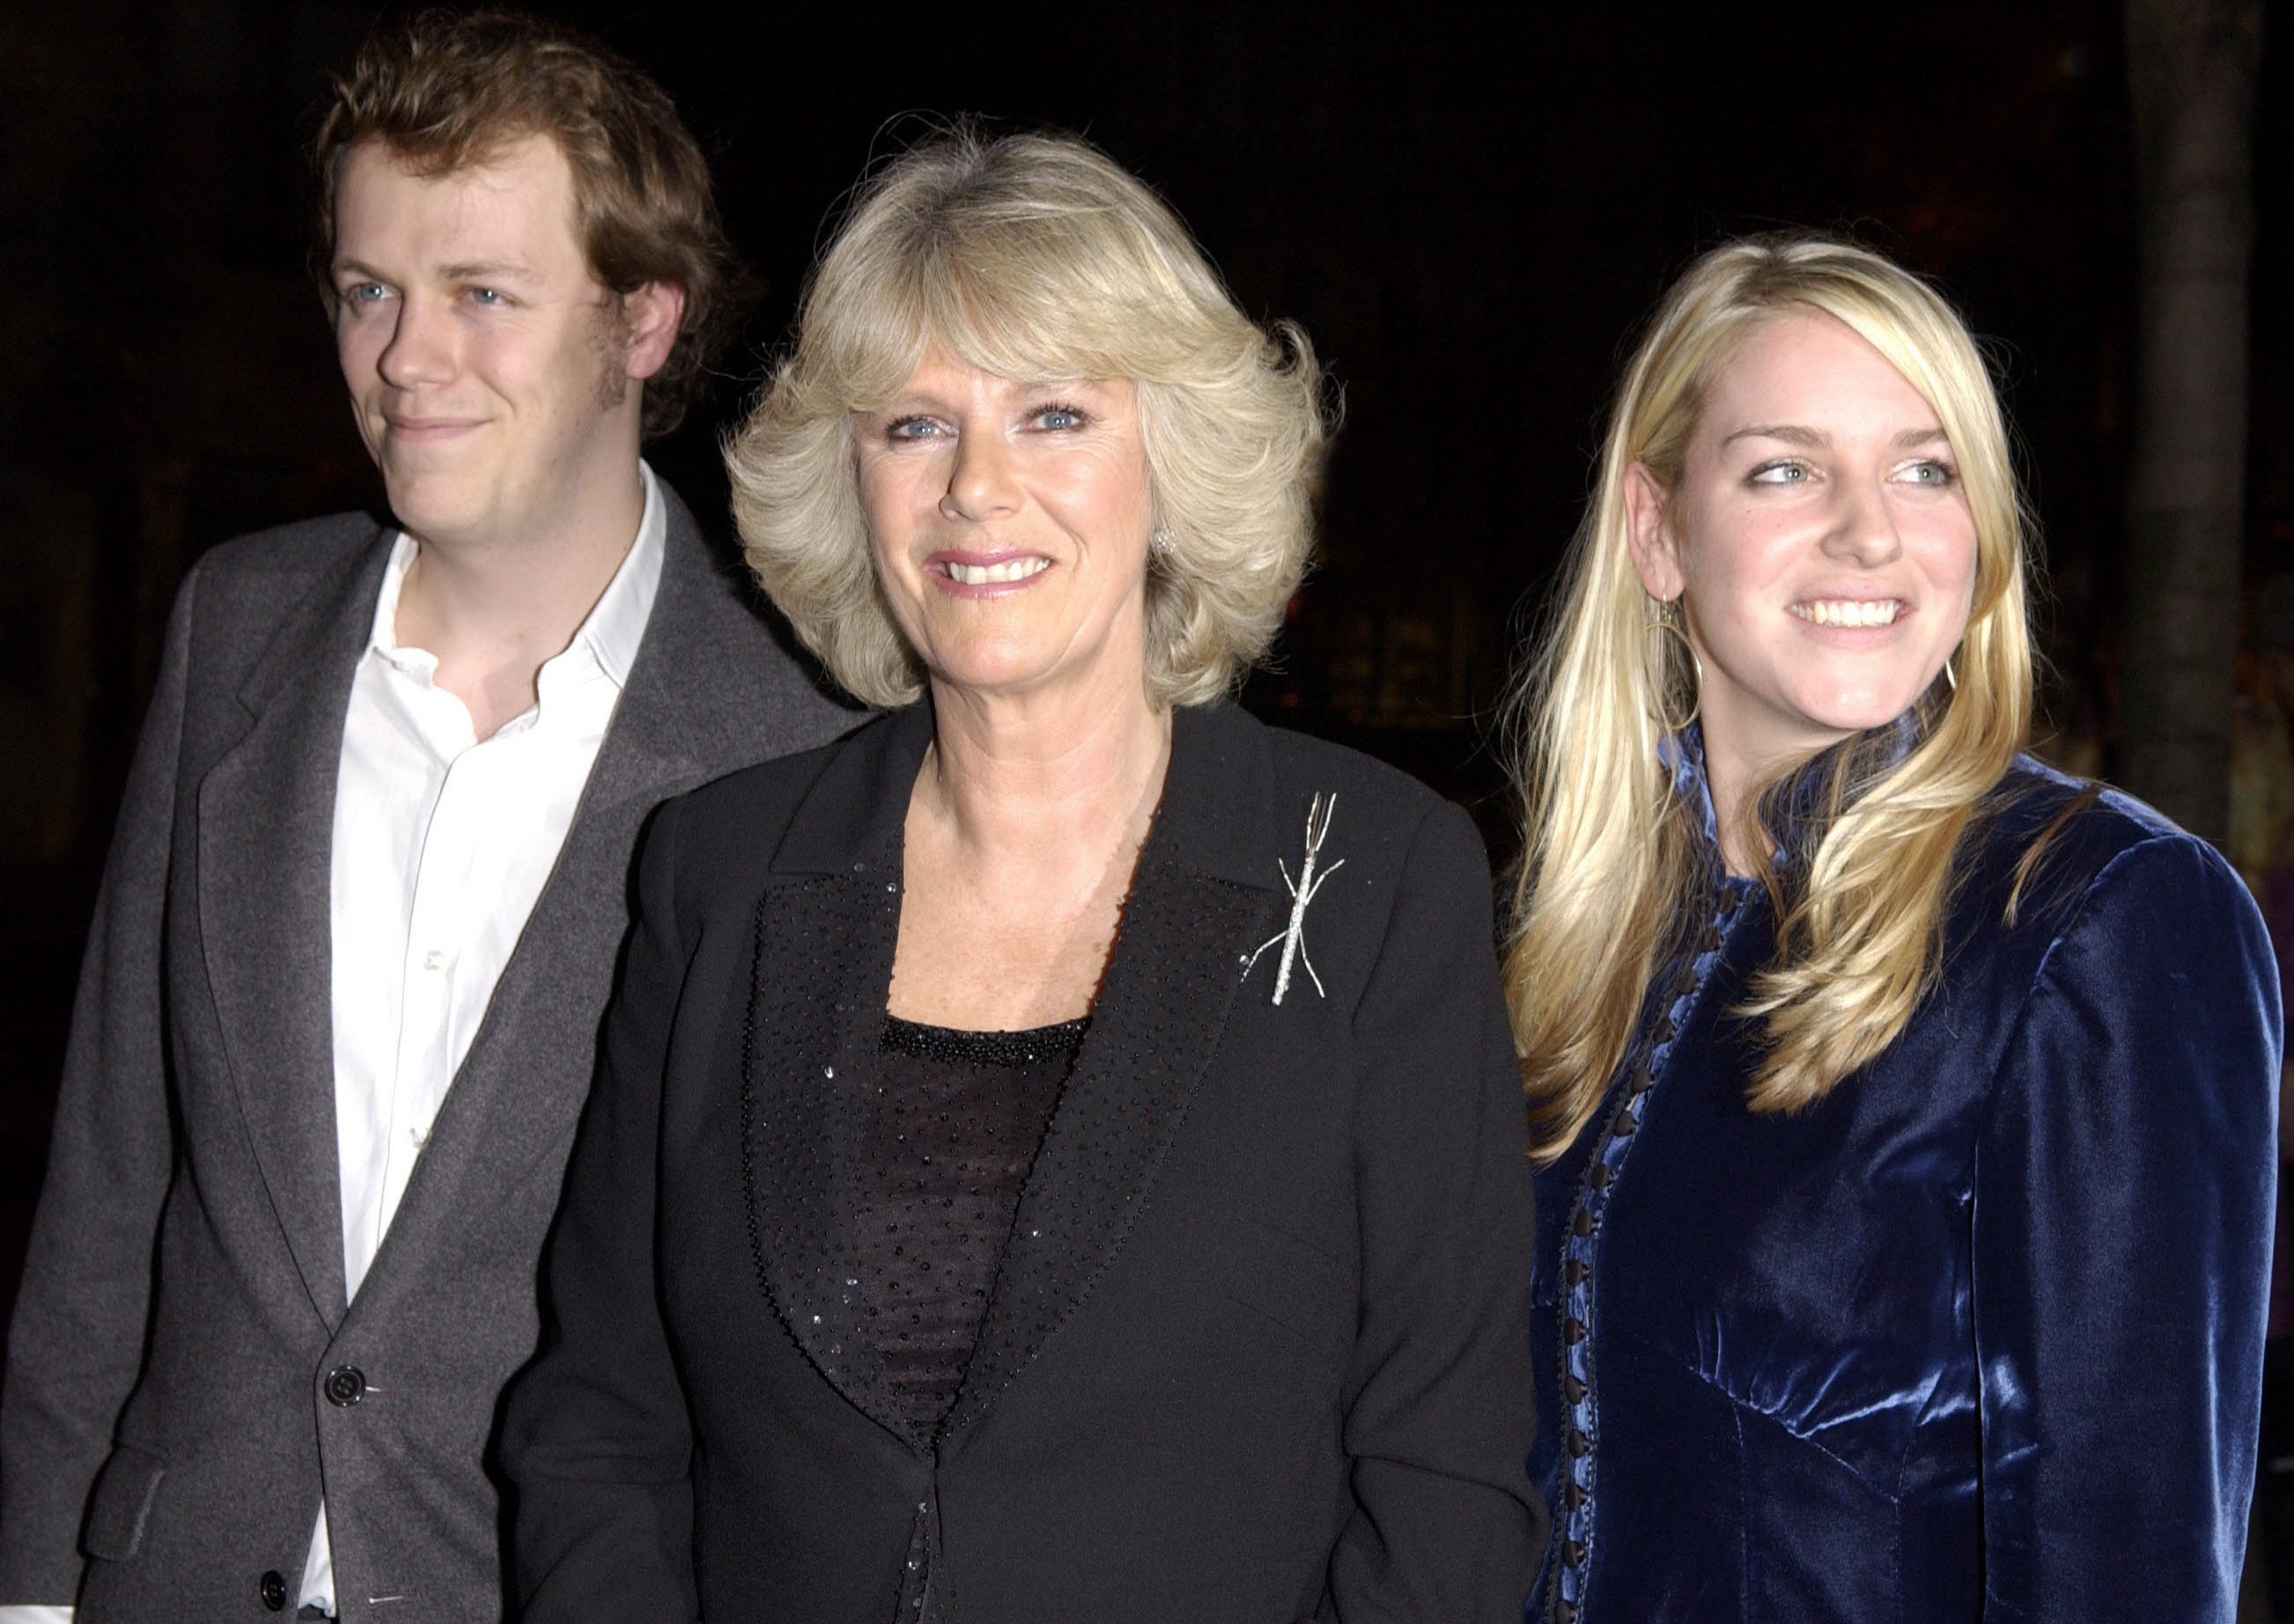 Camilla Parker Bowles with her son, Tom Parker Bowles, and daughter, Laura Parker Bowles, arriving at a party in Kensington to celebrate the release of his new book,  "E Is for Eating: An Alphabet of Greed" on November 3, 2004. | Source: Getty Images 